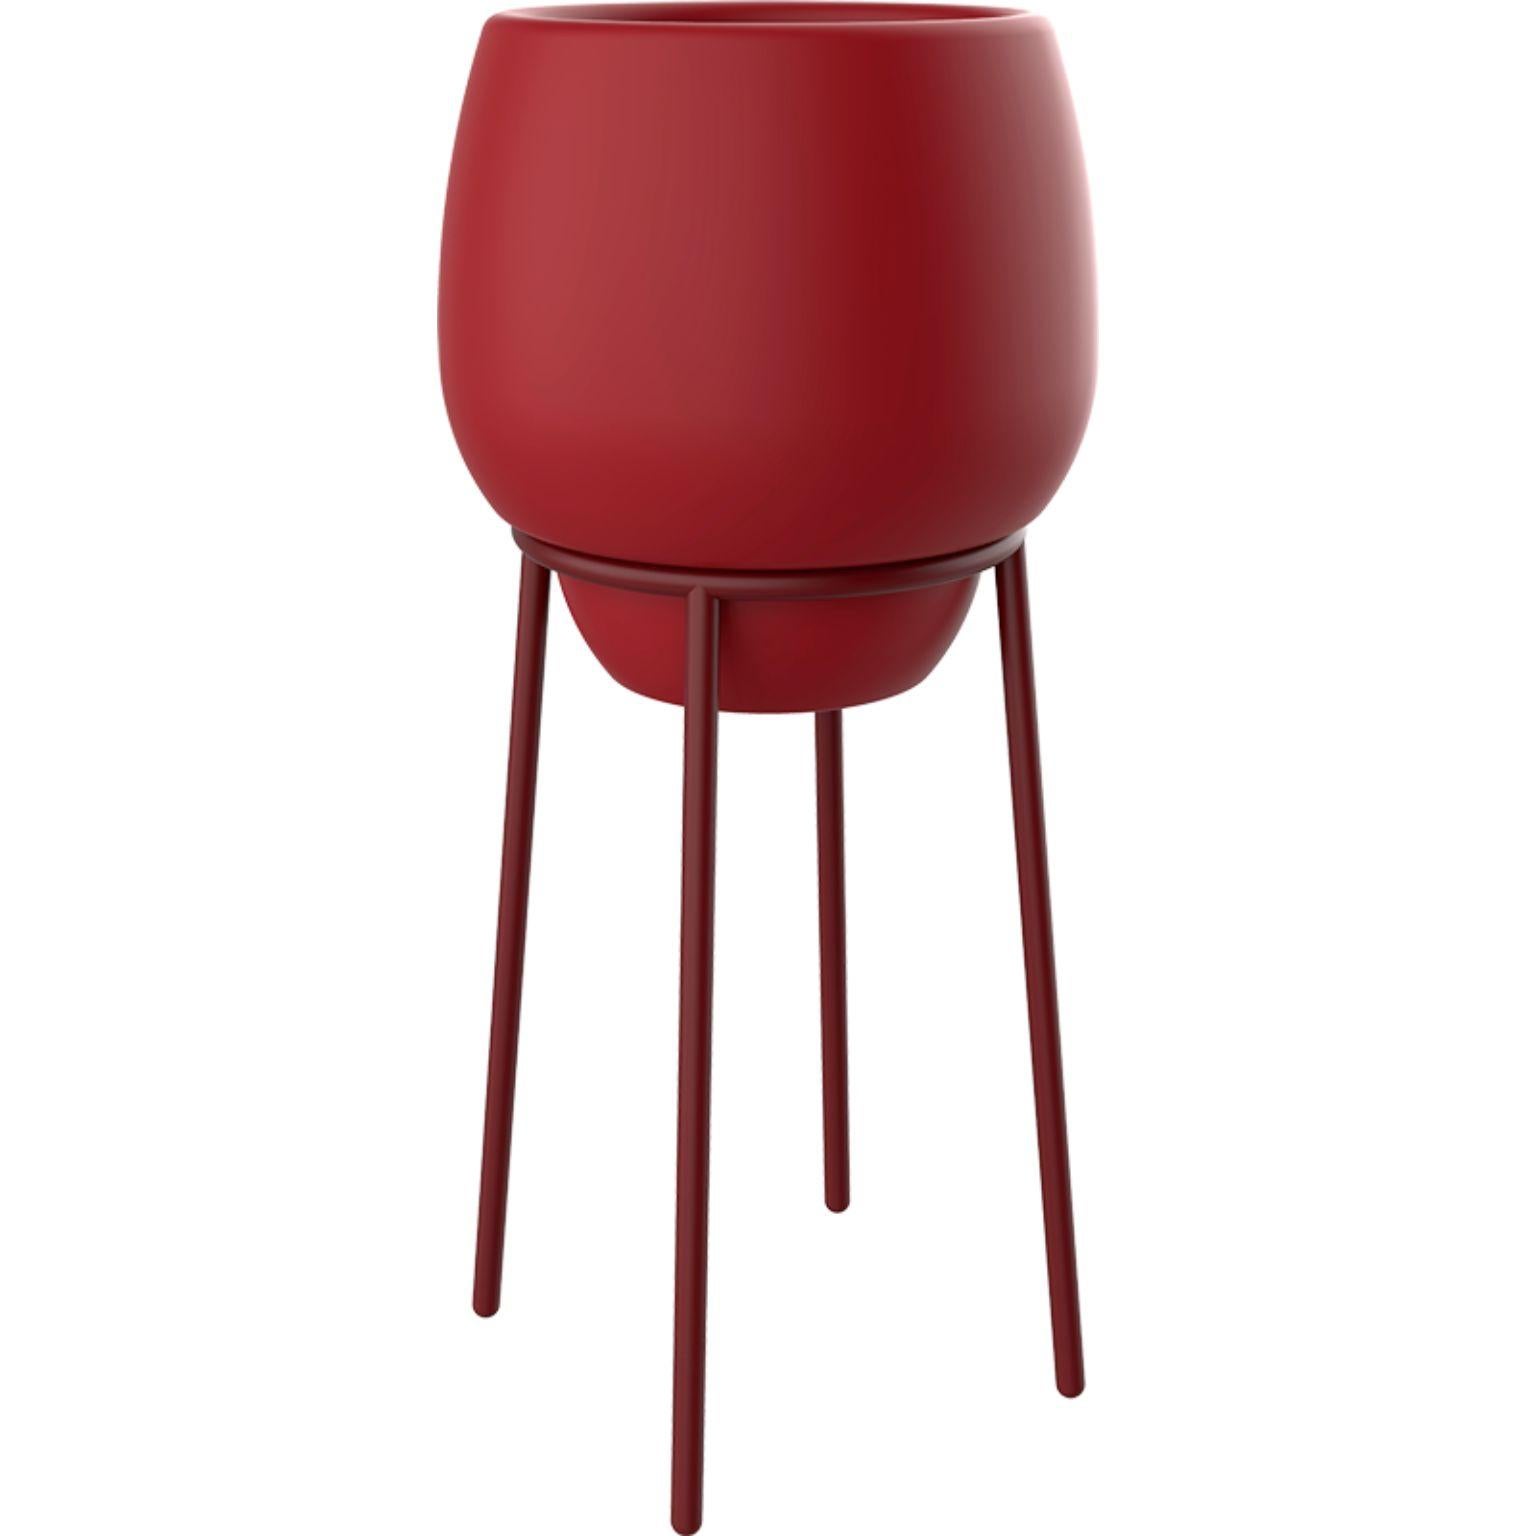 Lace Burgundy high 50 pot by Mowee
Dimensions: Ø55 x H112 cm.
Material: Polyethylene and stainless steel.
Weight: 9 kg.
Also available in different colors and finishes (Lacquered or retroilluminated).

Lace is a collection of furniture made by